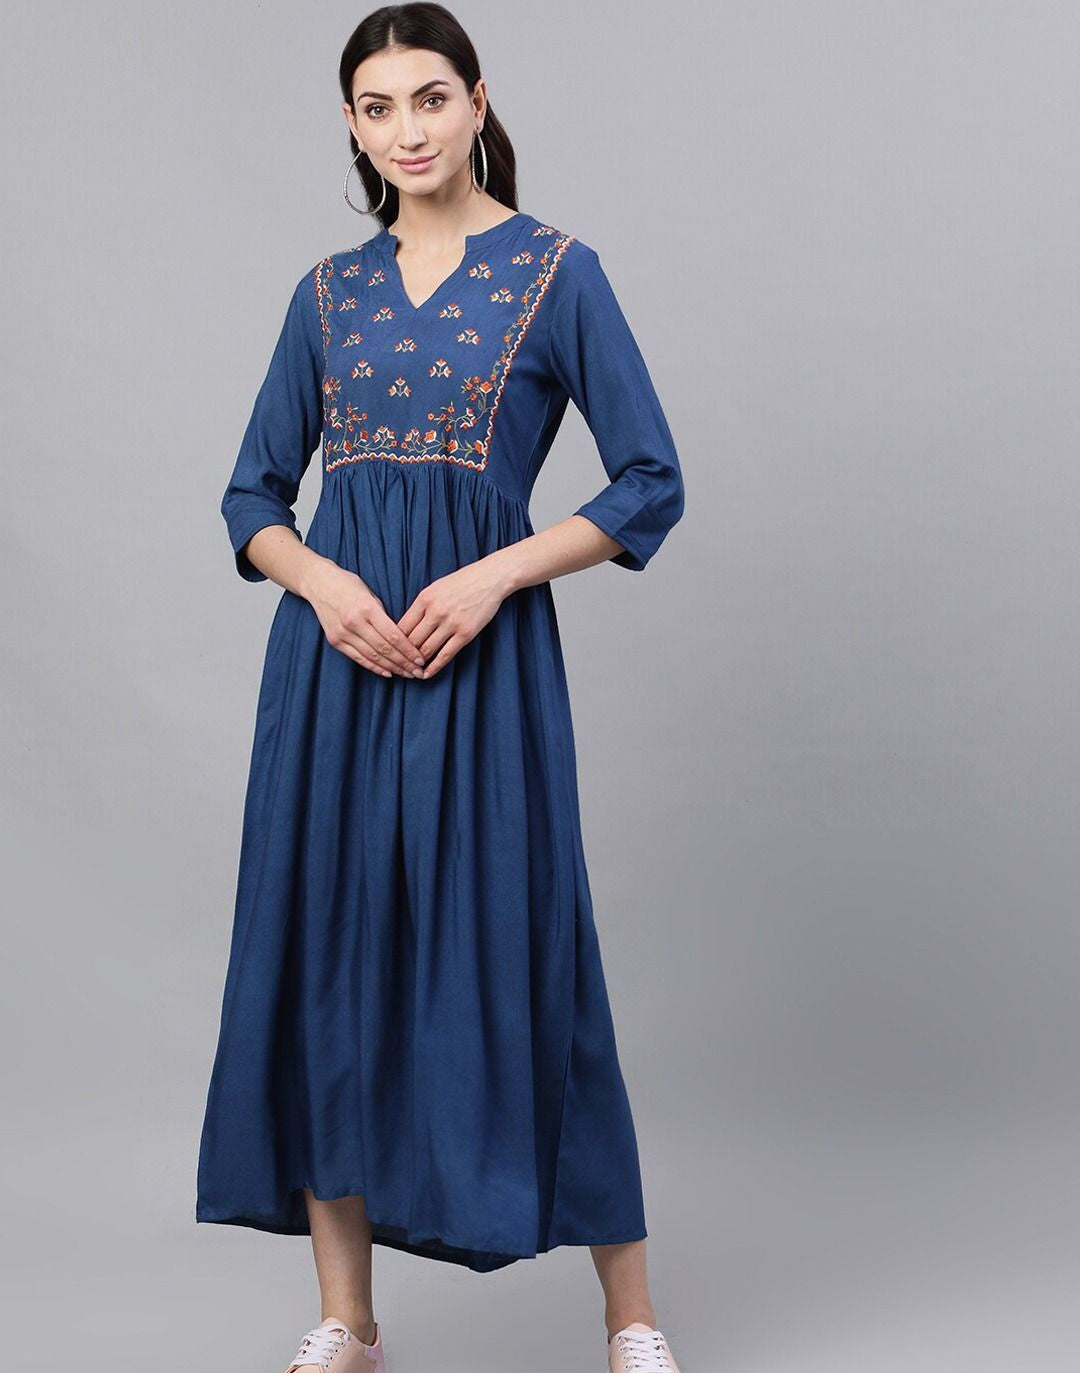 Blue Solid Embroidered Mandarin Collar Viscose Rayon Fit and Flare Dress